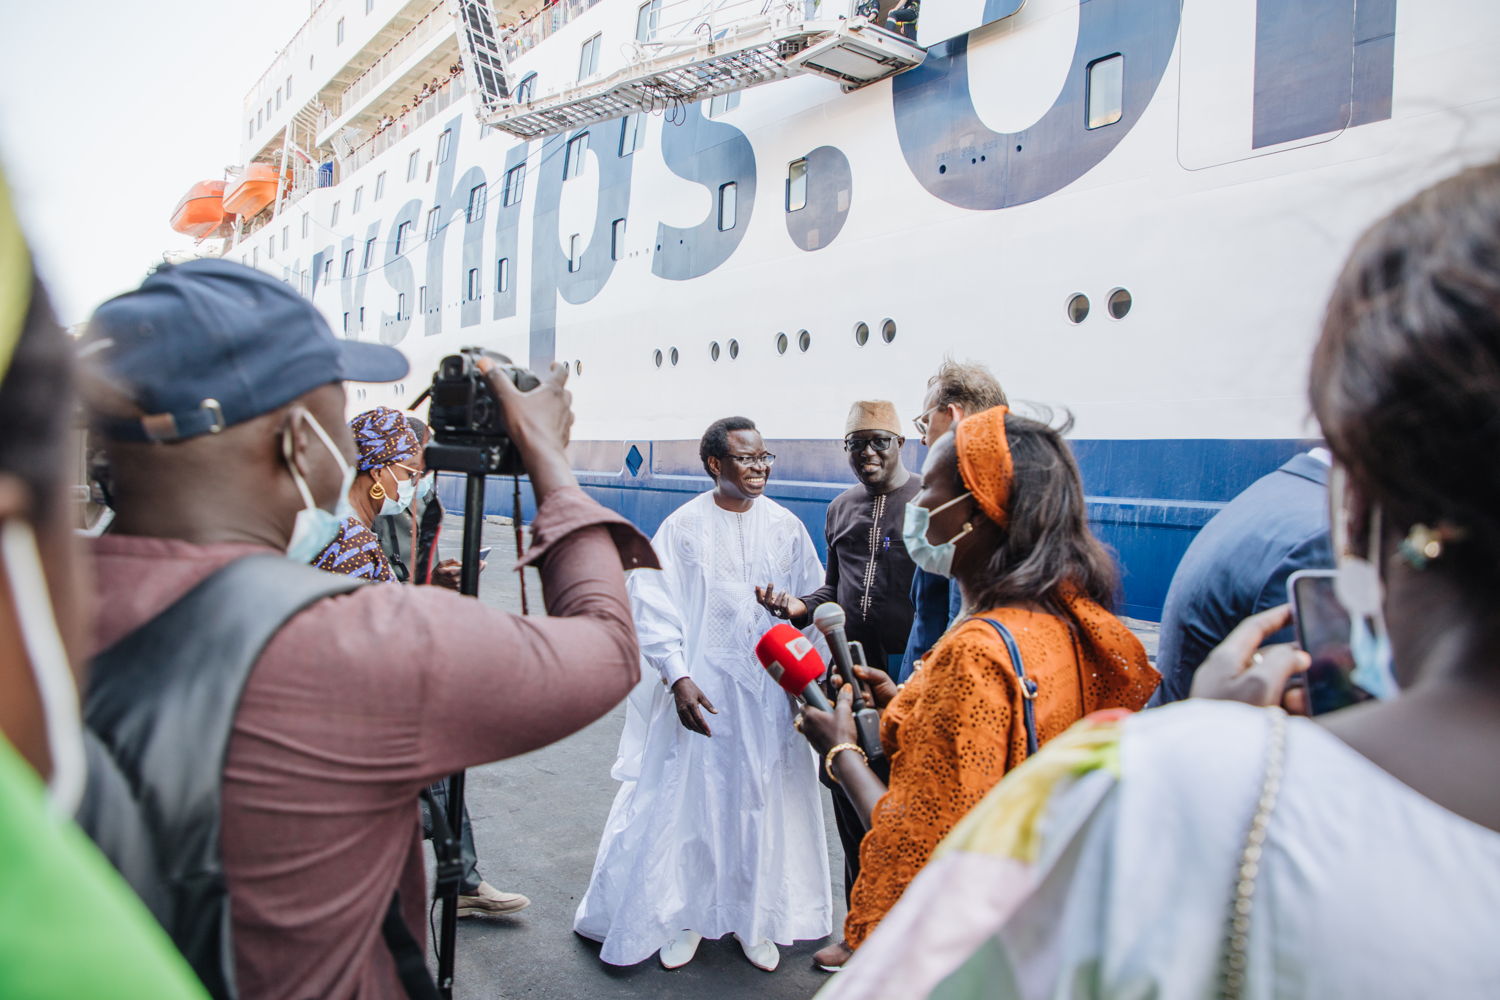 Serigne Gueye Diop, Advisor to the President of Senegal, is interviewed at the Global Mercy arrival to Dakar on 27 May 2022.